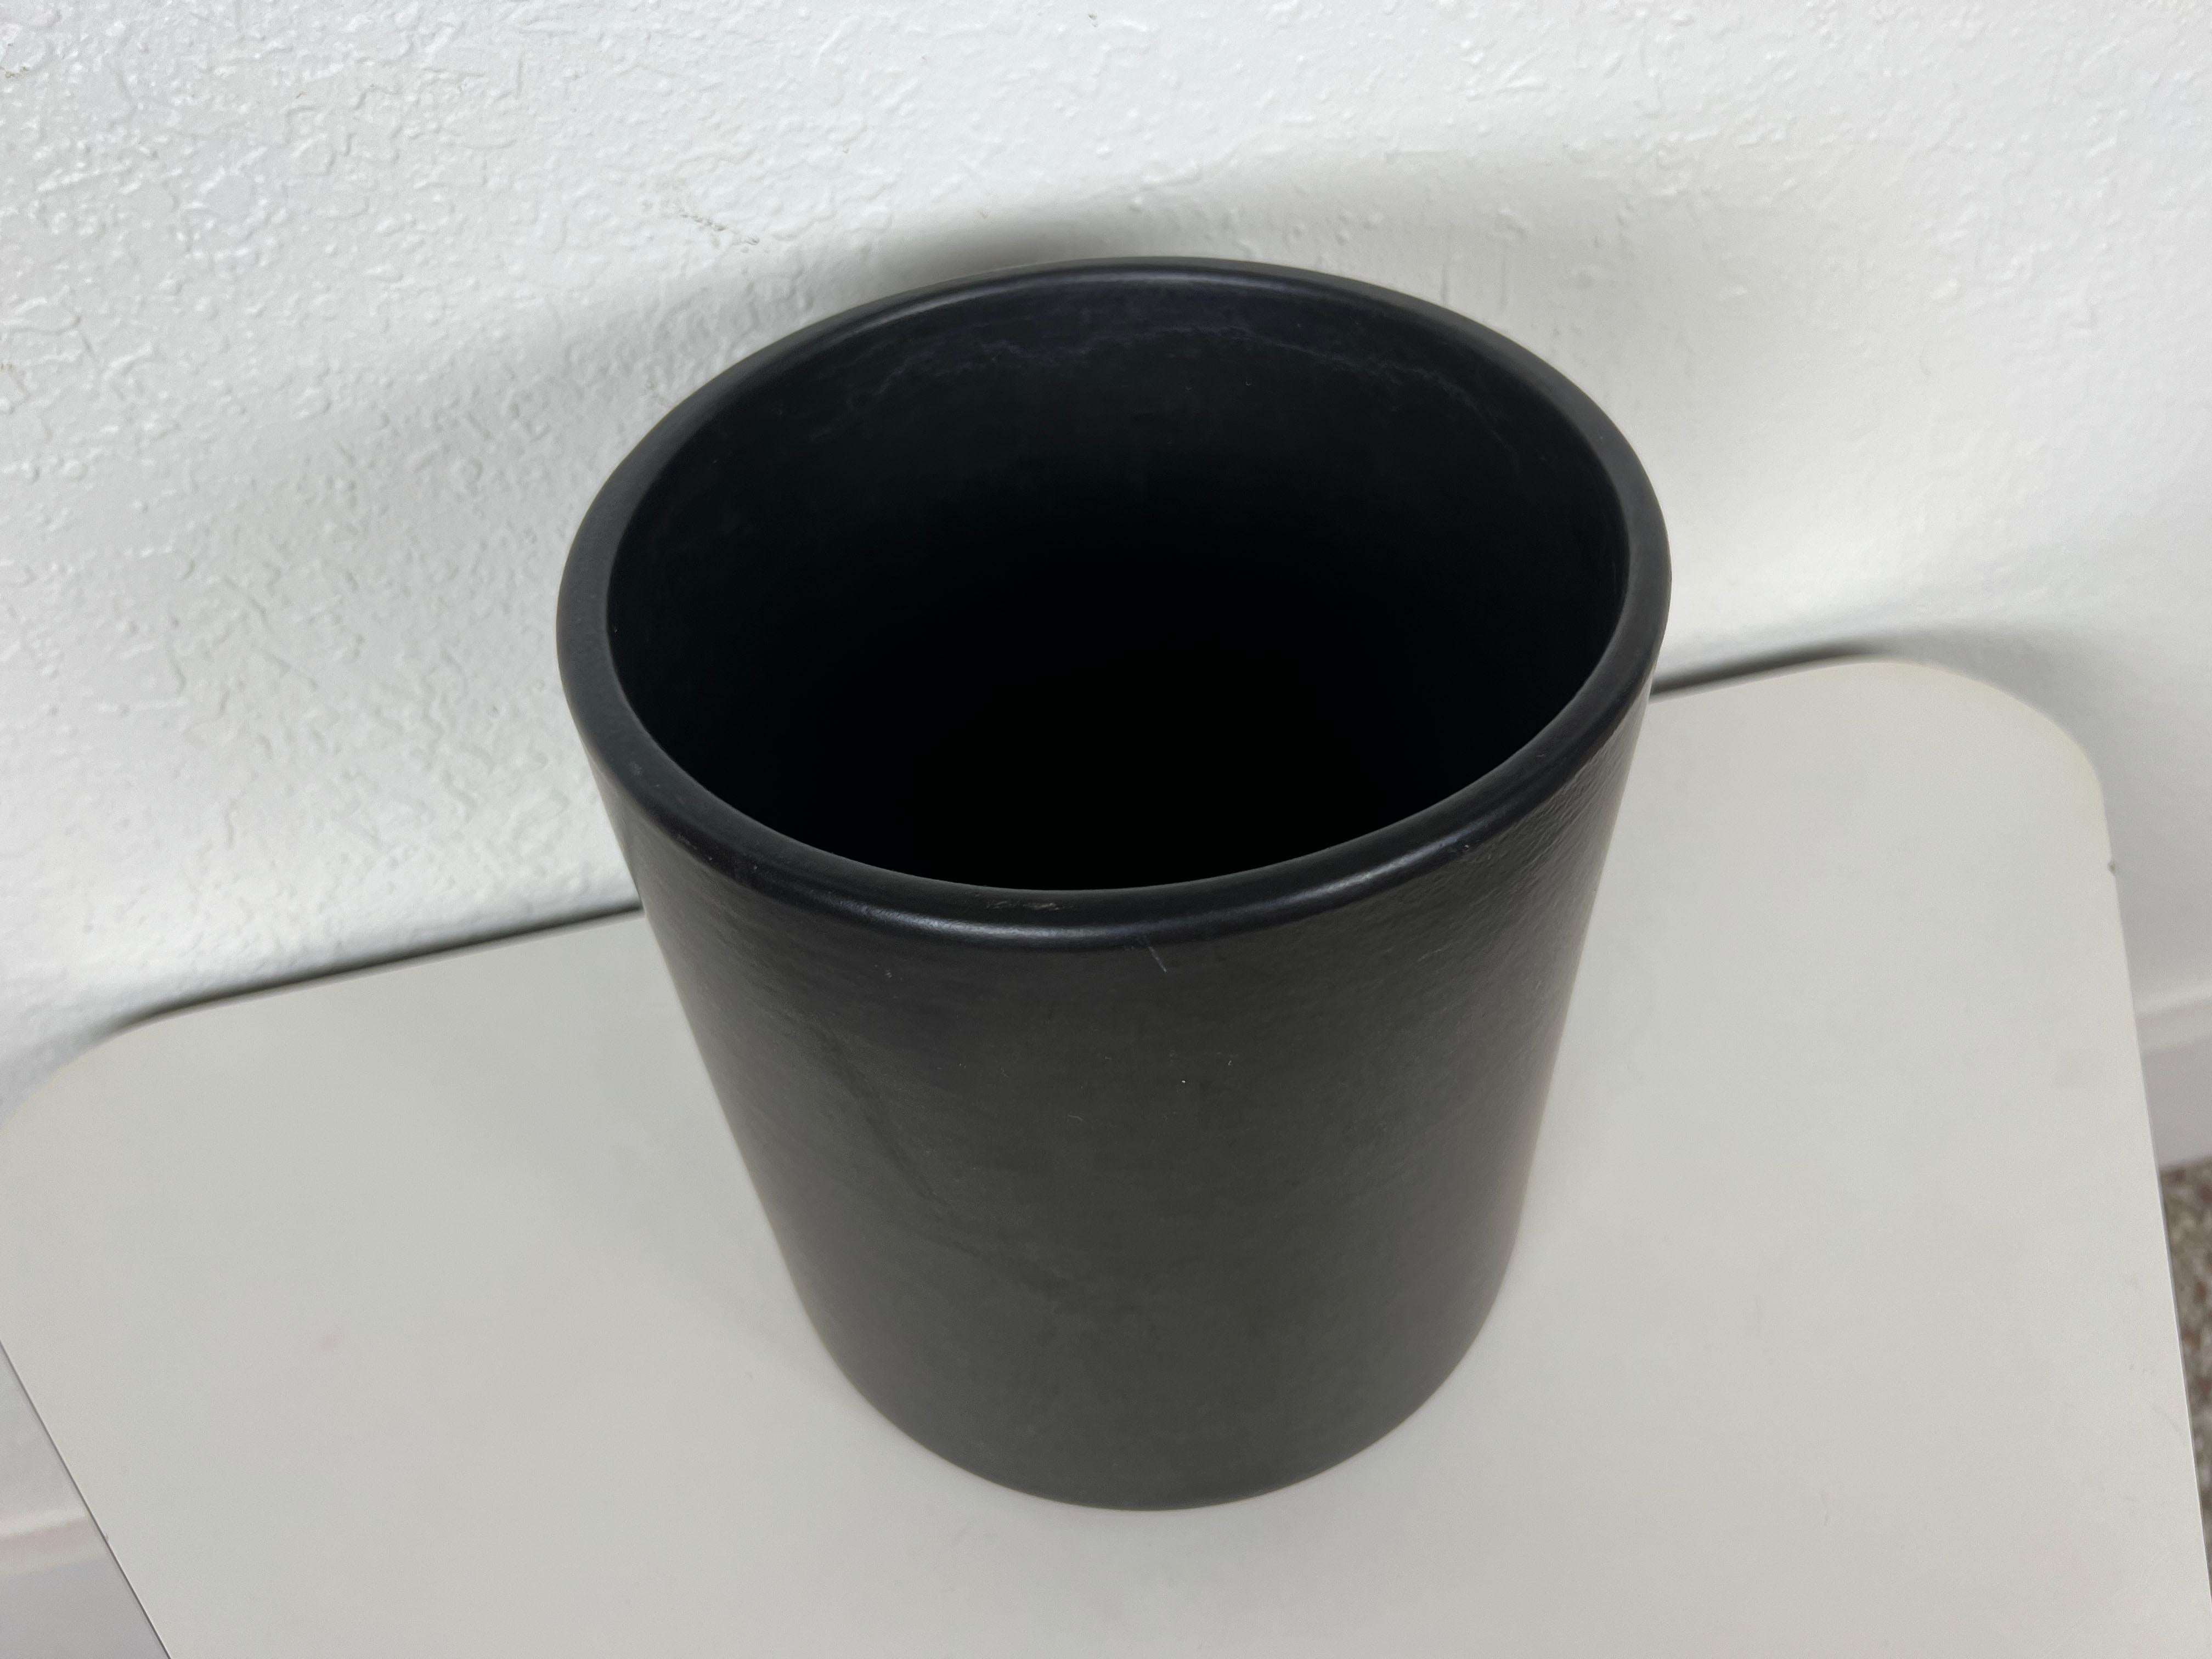 Vintage matte black glazed AC-12 cylindrical planter by Gainey Ceramics. For use indoor or outdoors. 

Maker: Gainey Ceramics

Origin: La Verne, California

Year: 1960s

Style: Mid-Century Modern

Dimensions: 8.25